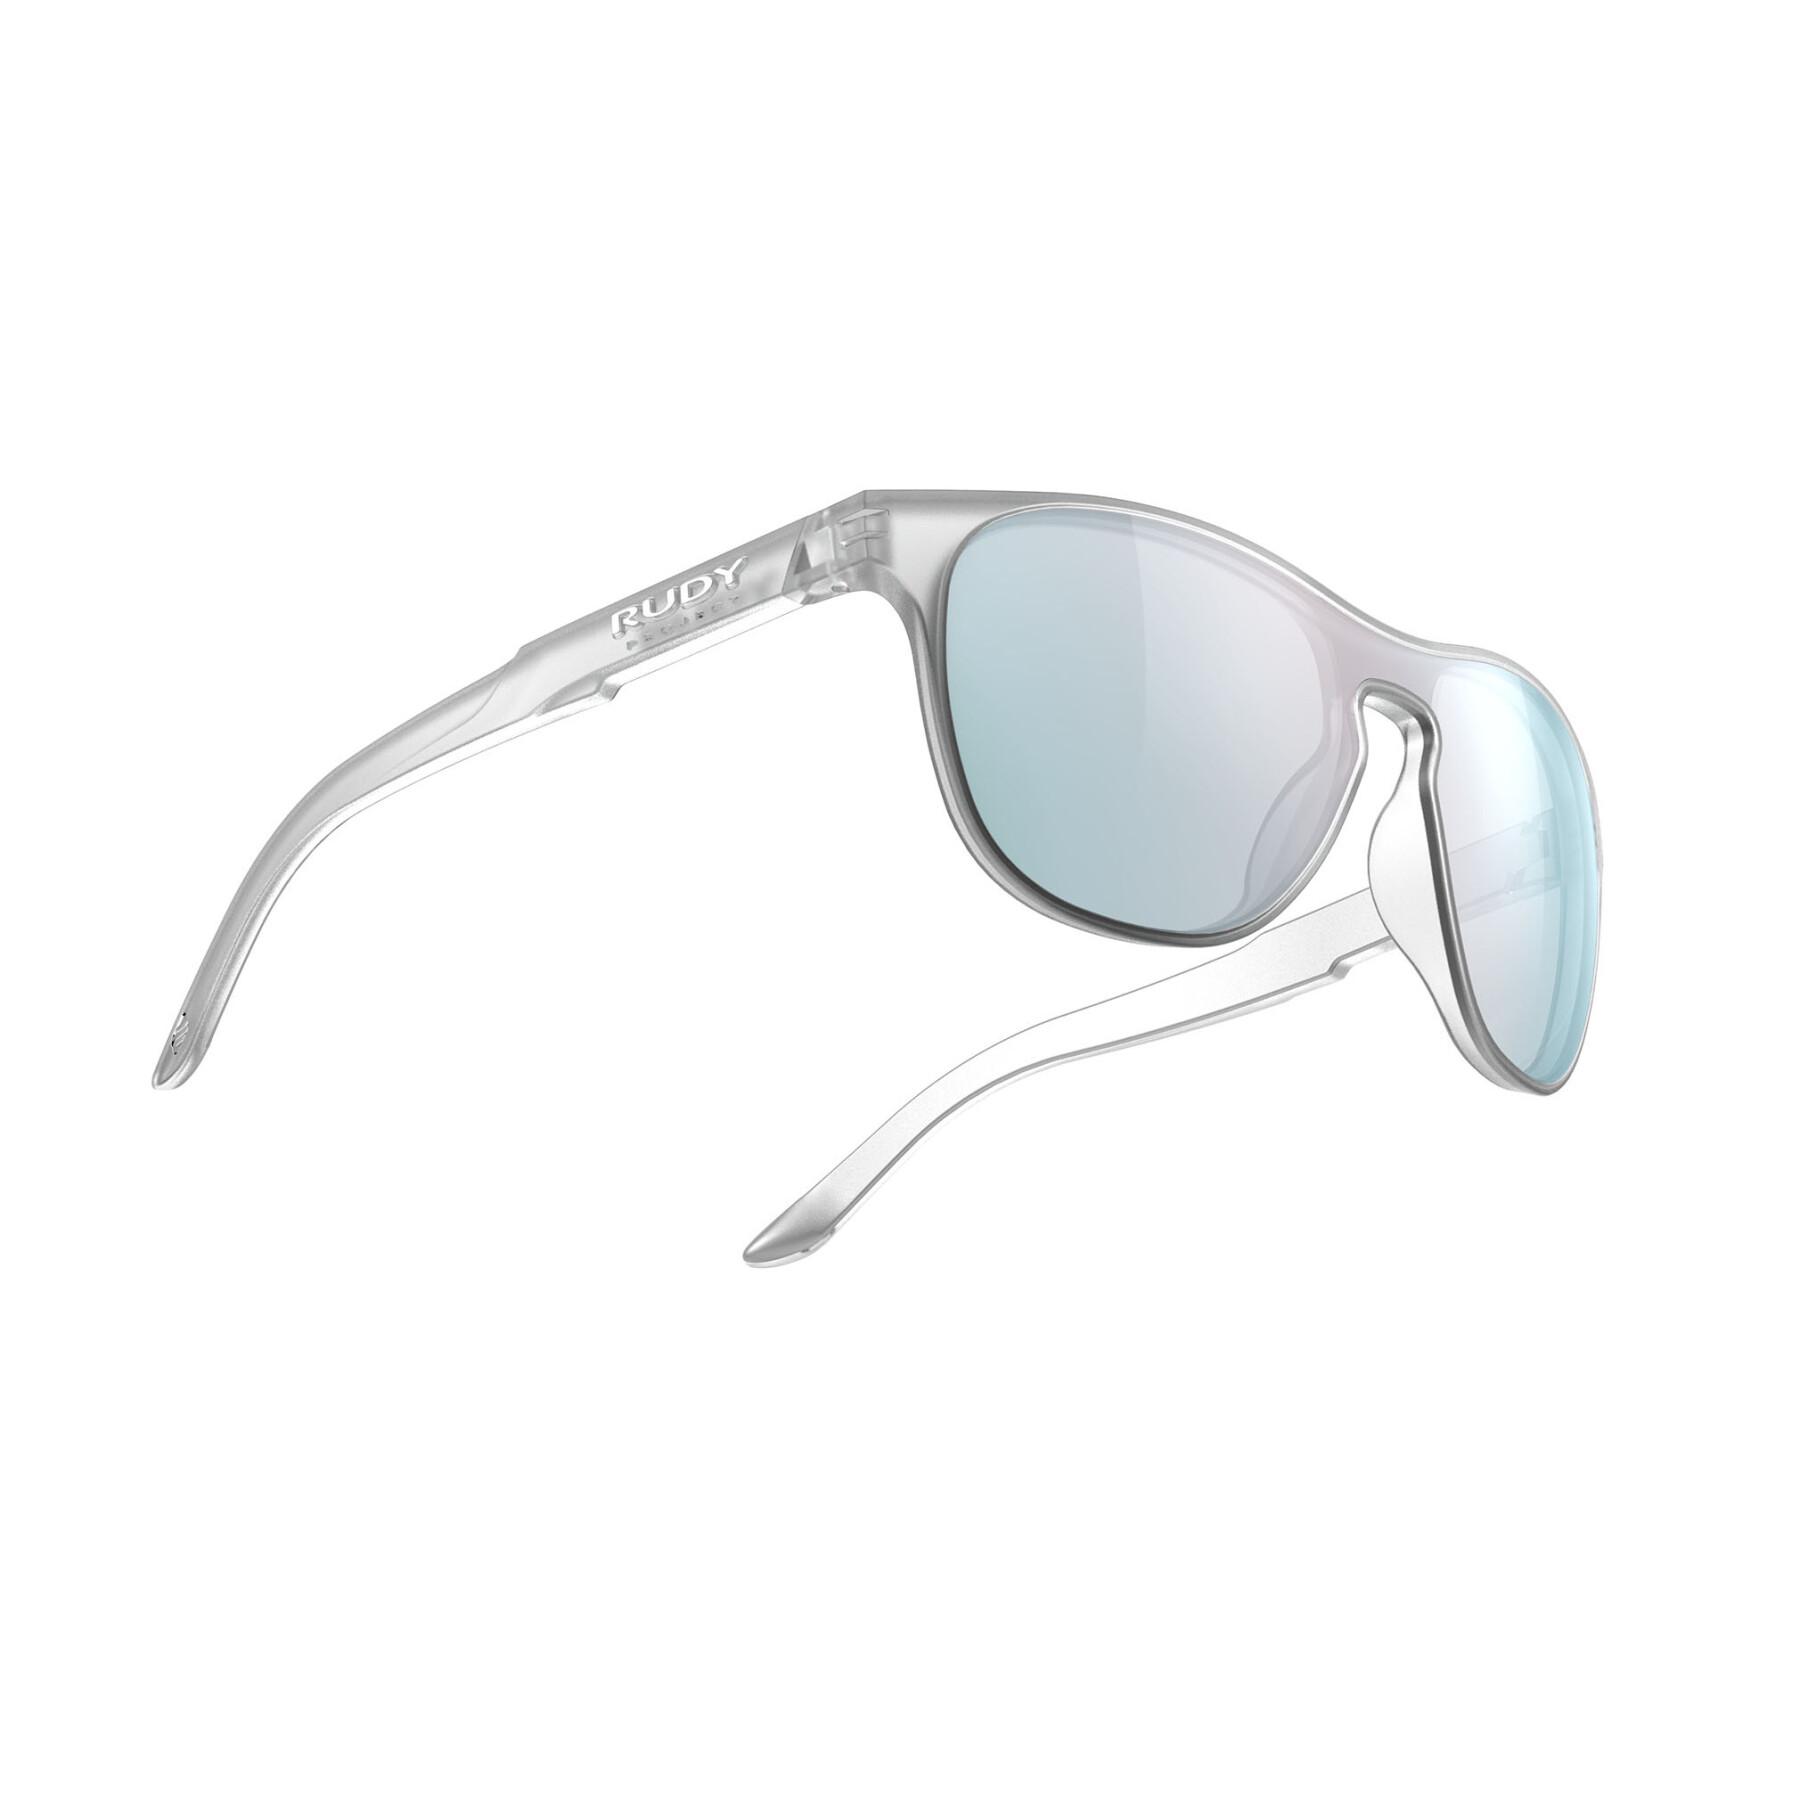 Sonnenbrille Rudy Project soundshield